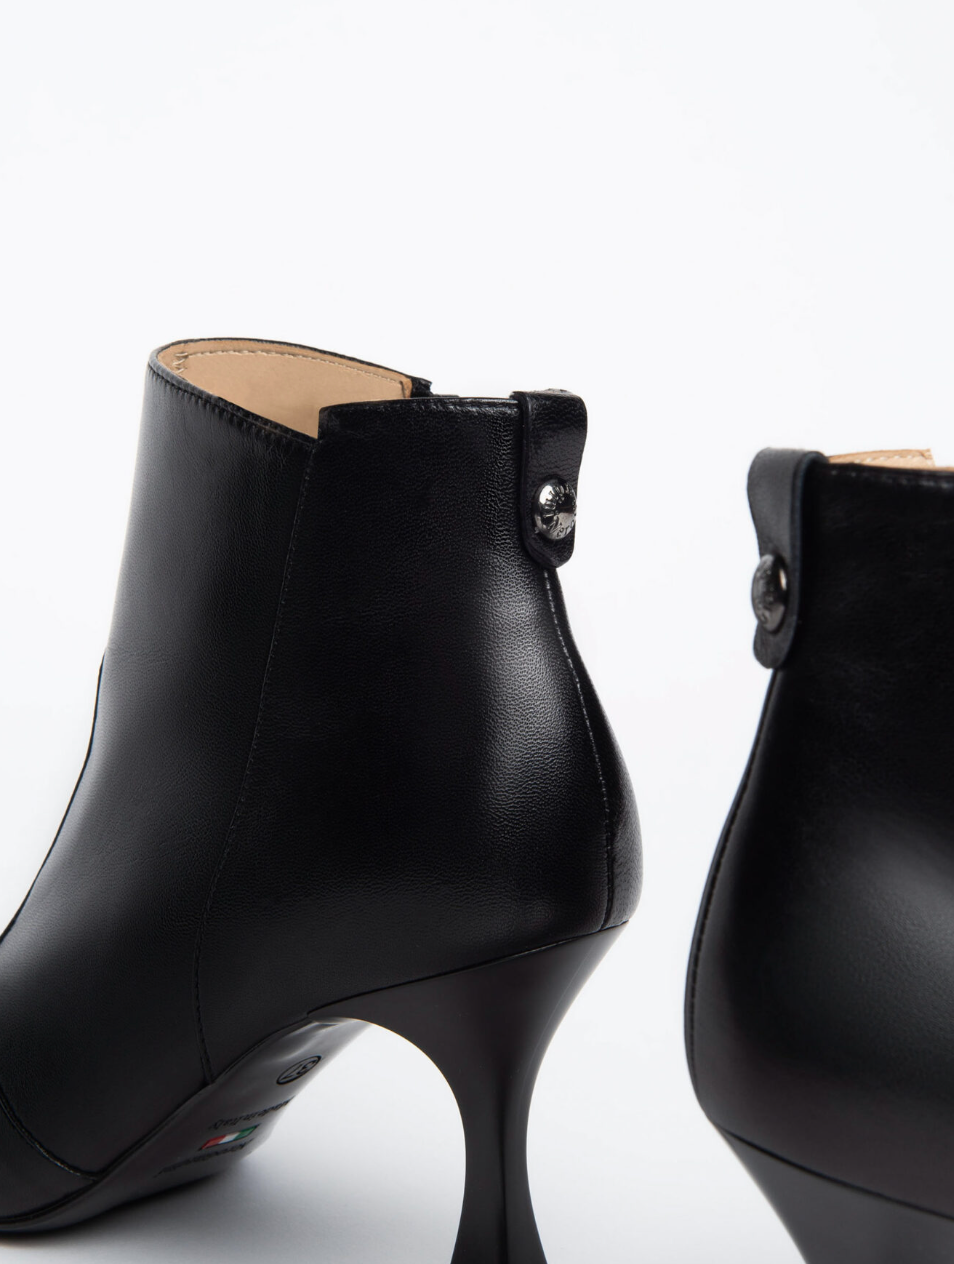 Black Leather Heeled Ankle Boot